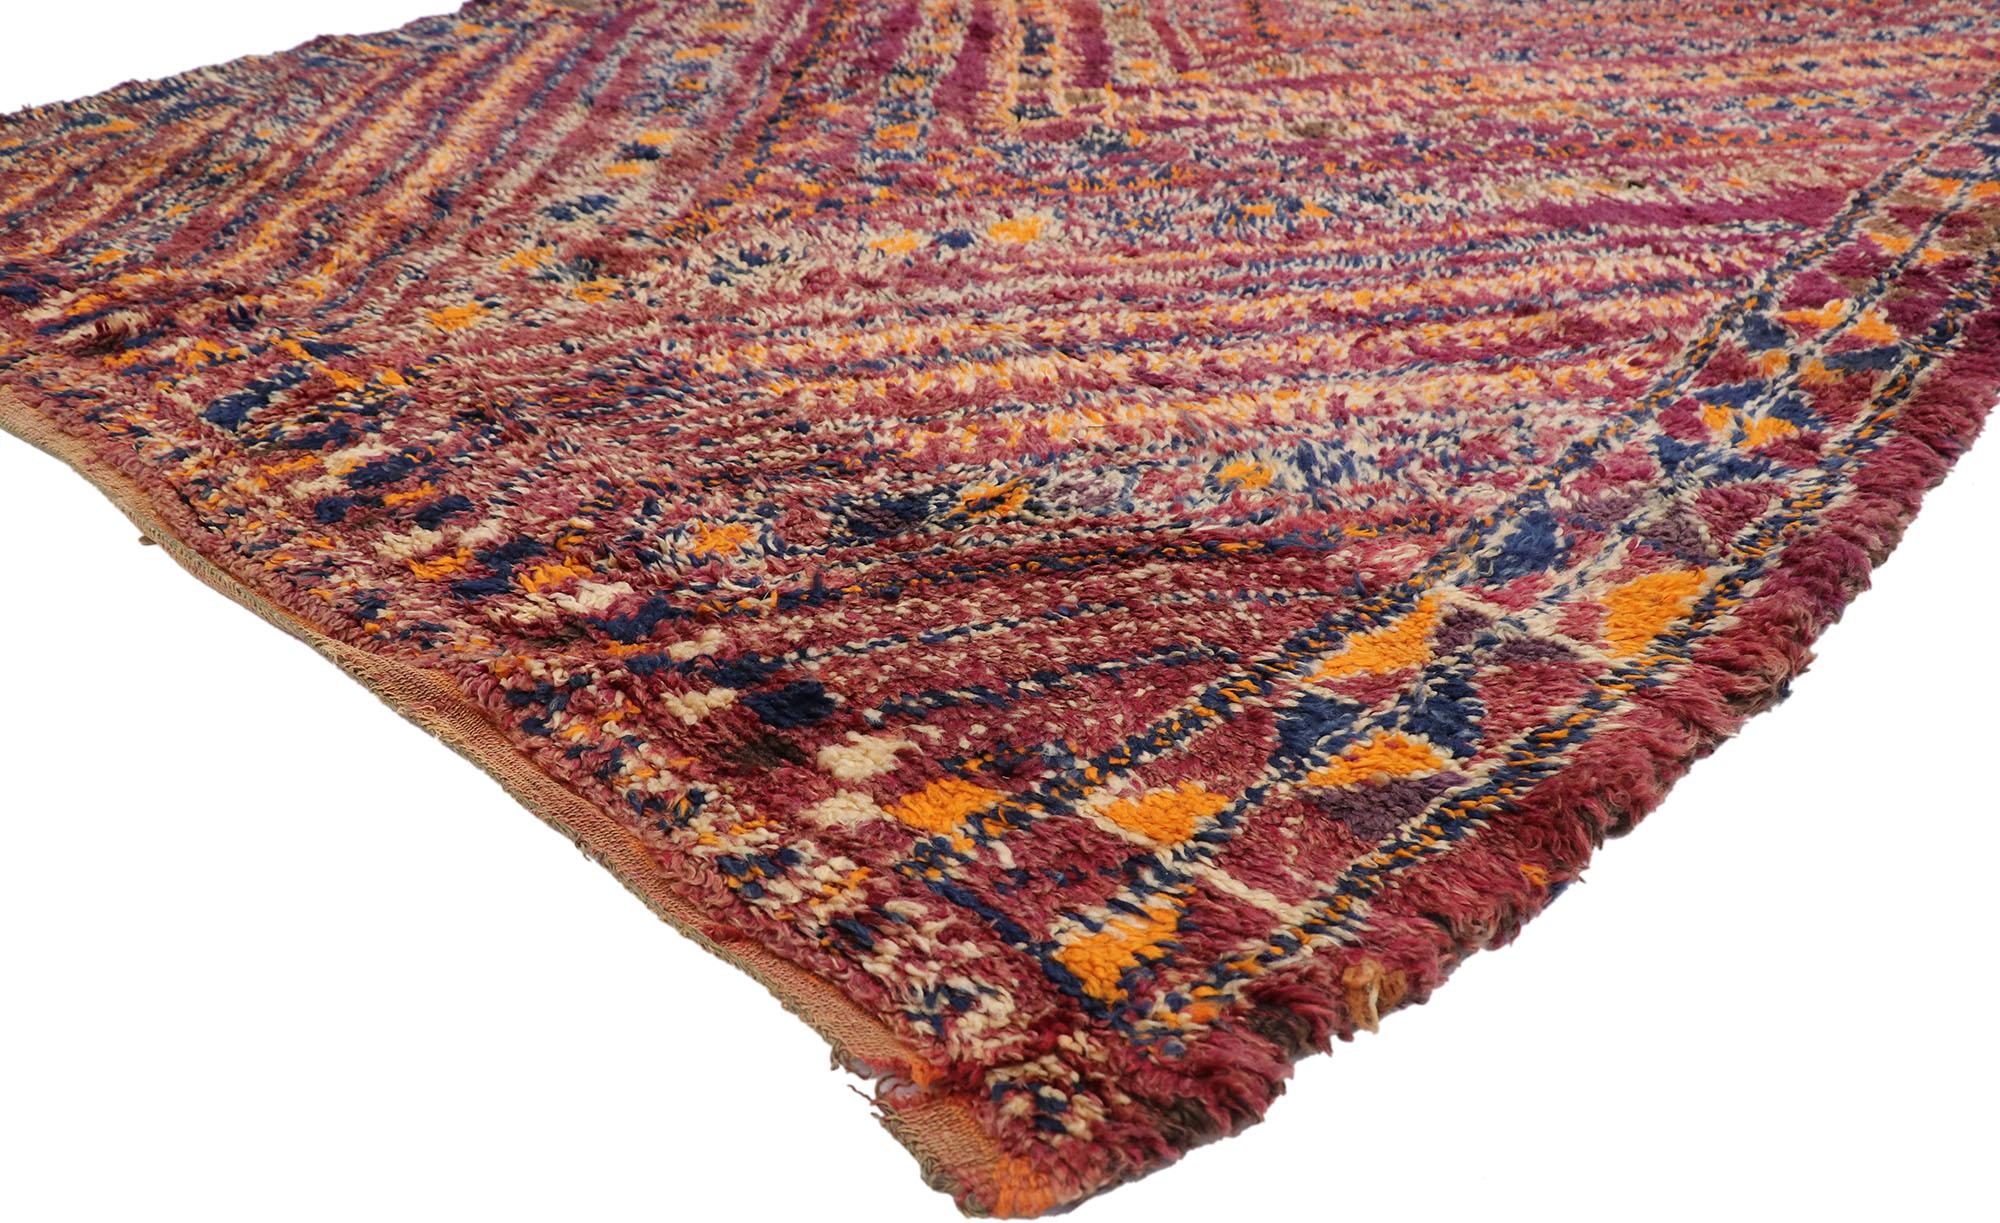 21324 Vintage Berber Beni M'Guild Moroccan rug with Bohemian Style 06'08 x 09'09. Showcasing a bold expressive design, incredible detail and texture, this hand knotted wool vintage Berber Beni M'Guild Moroccan rug is a captivating vision of woven